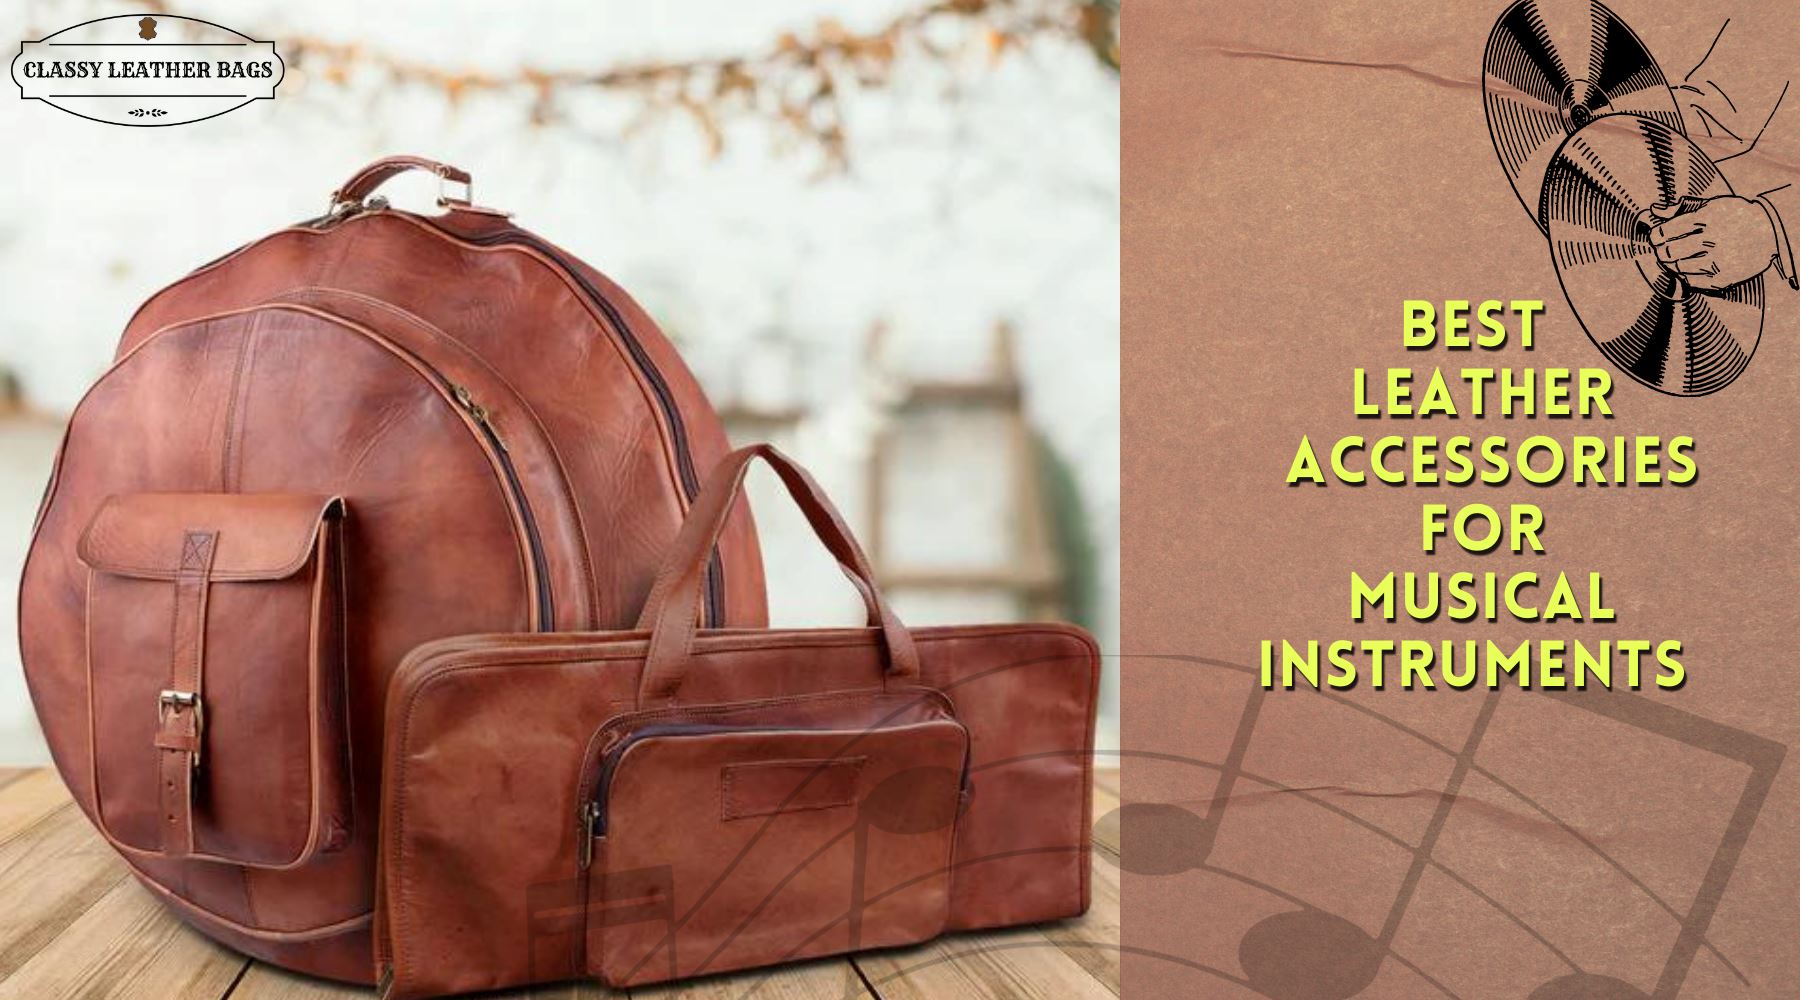 Best Leather Accessories For Musical Instruments